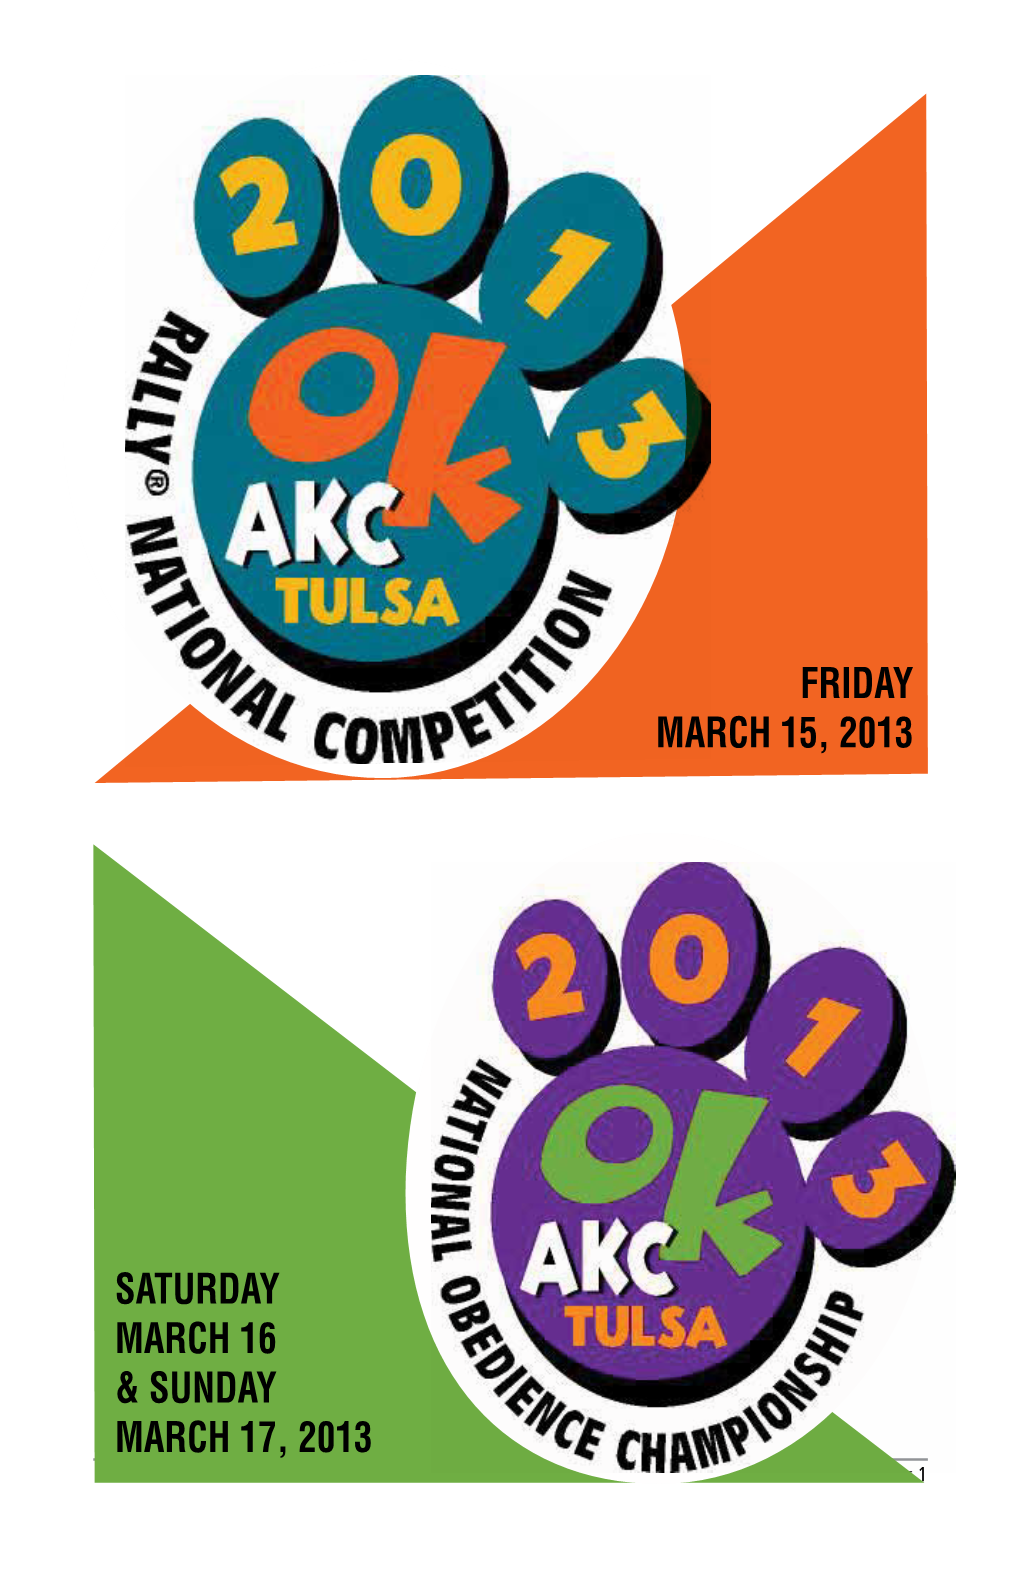 Friday March 15, 2013 Saturday March 16 & Sunday